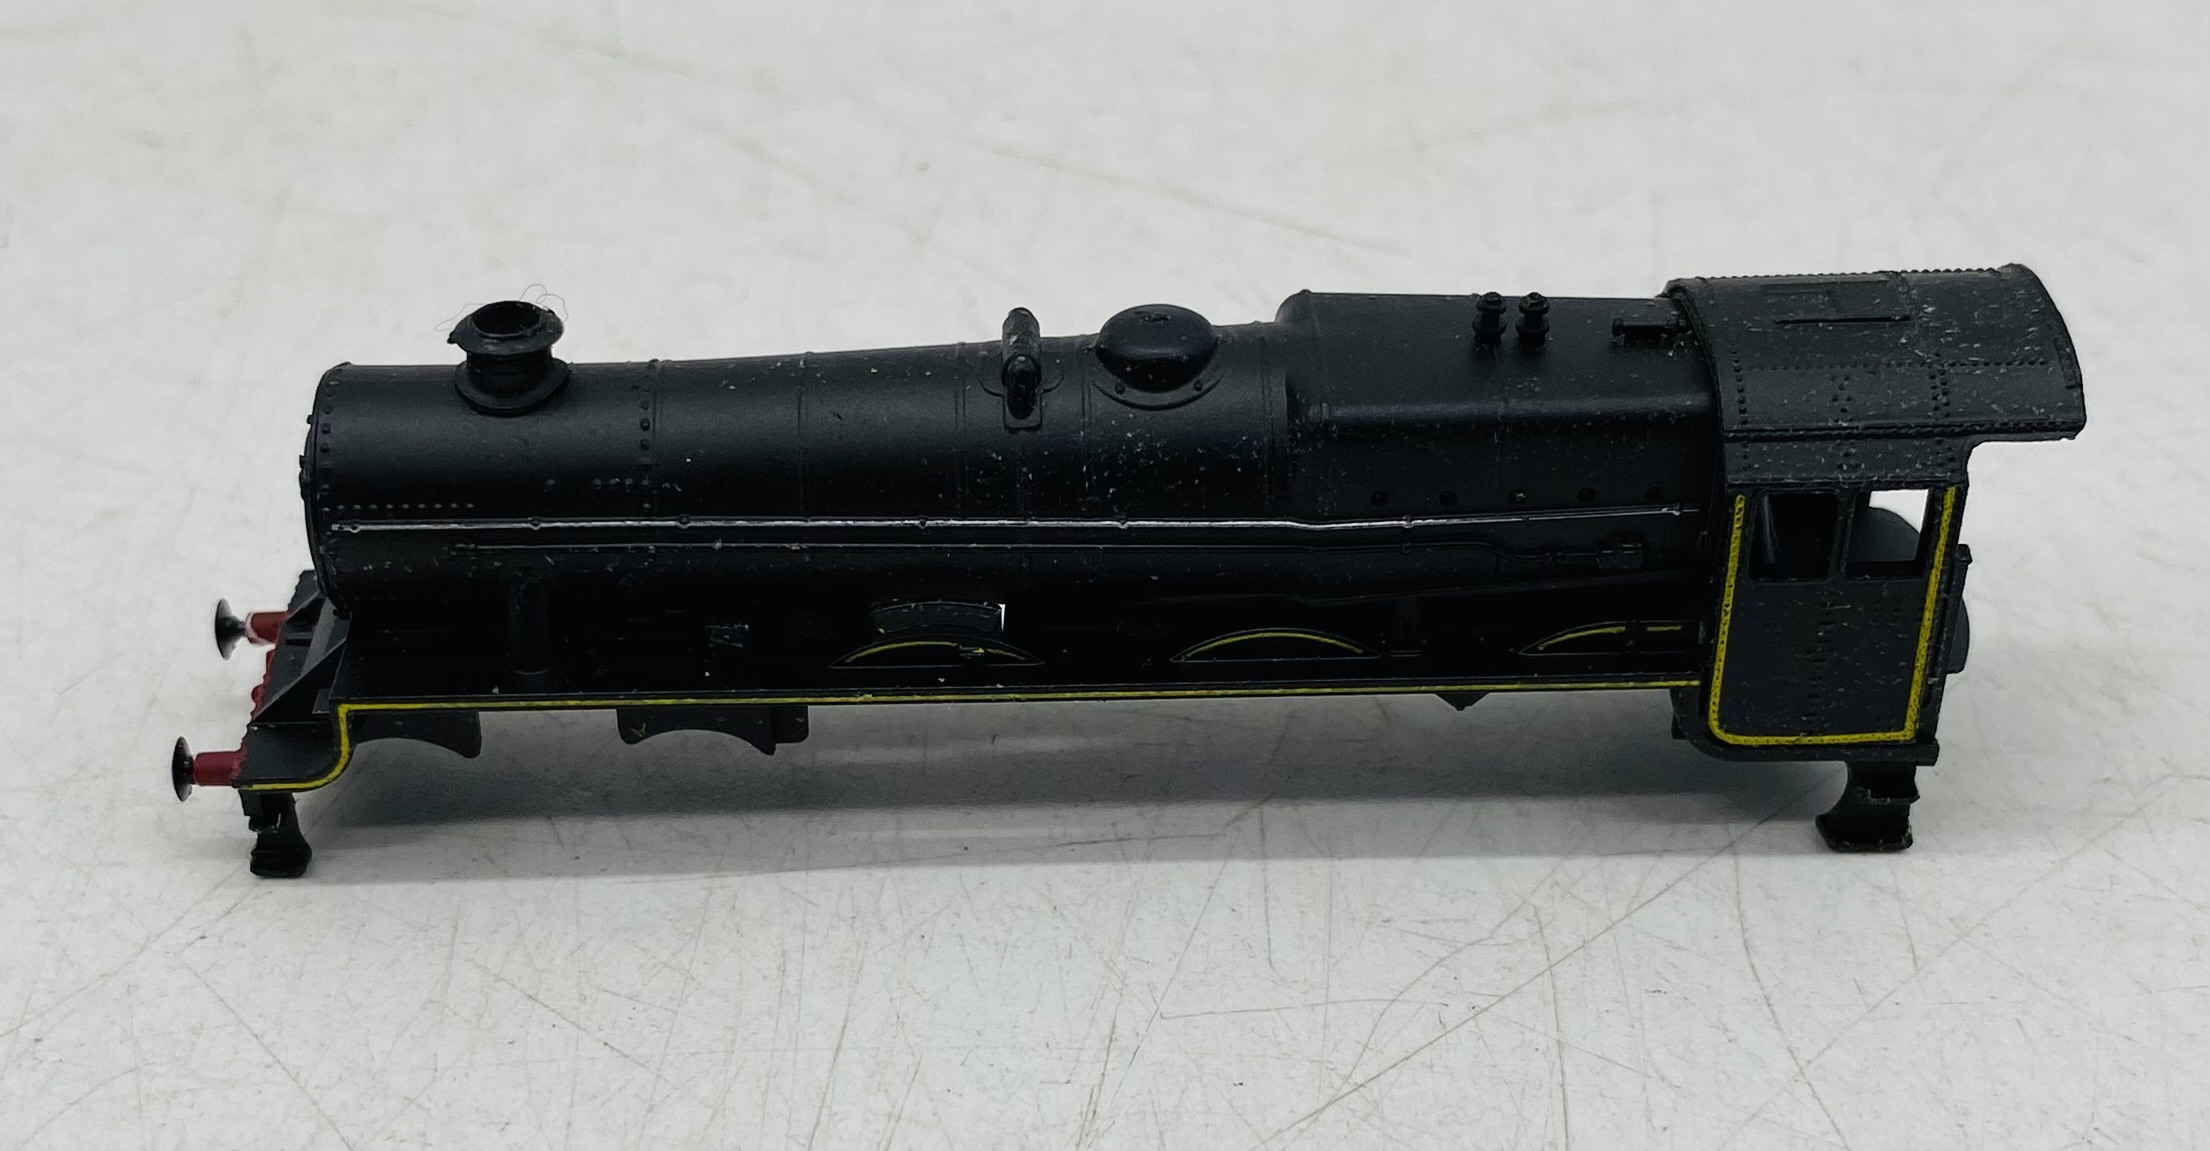 A collection of N gauge locomotive shells in black livery - shells only, no axels - Image 2 of 4